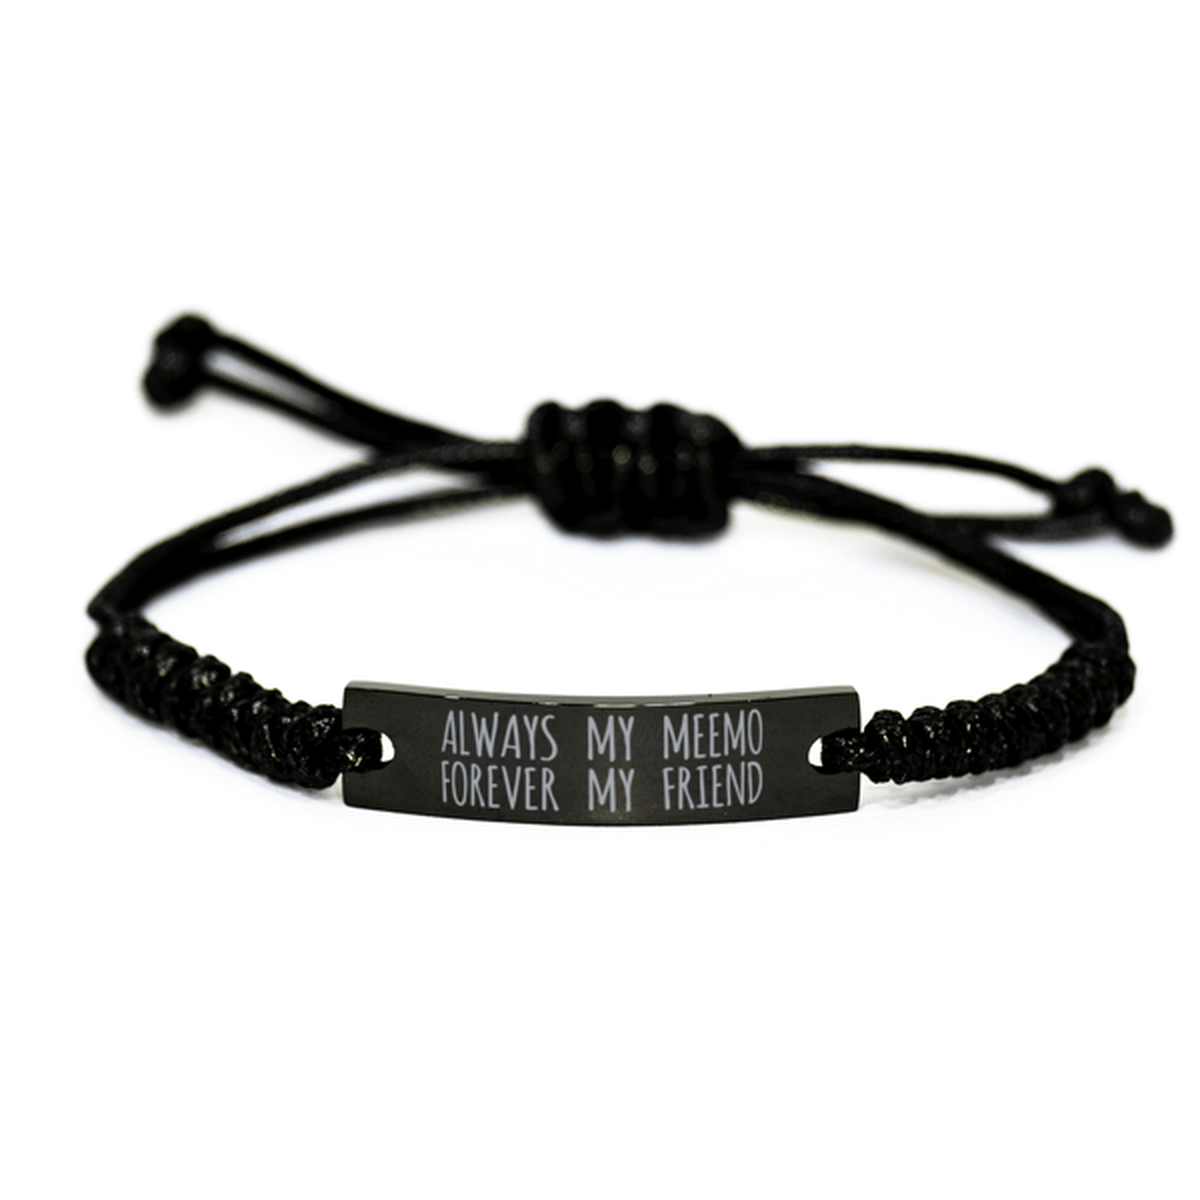 Inspirational Meemo Black Rope Bracelet, Always My Meemo Forever My Friend, Best Birthday Gifts For Family